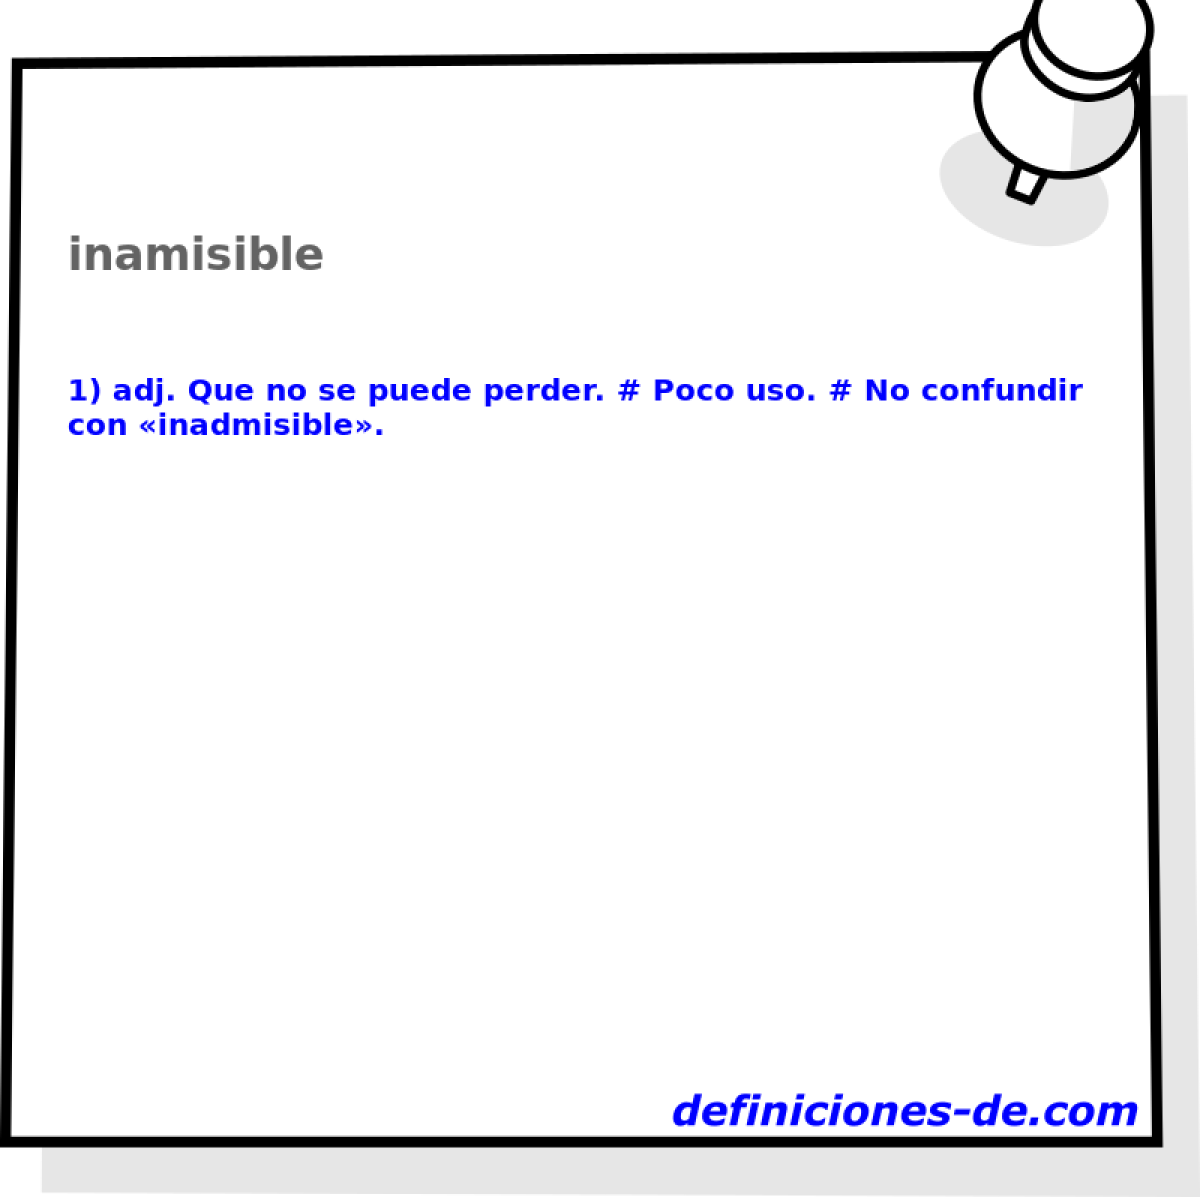 inamisible 